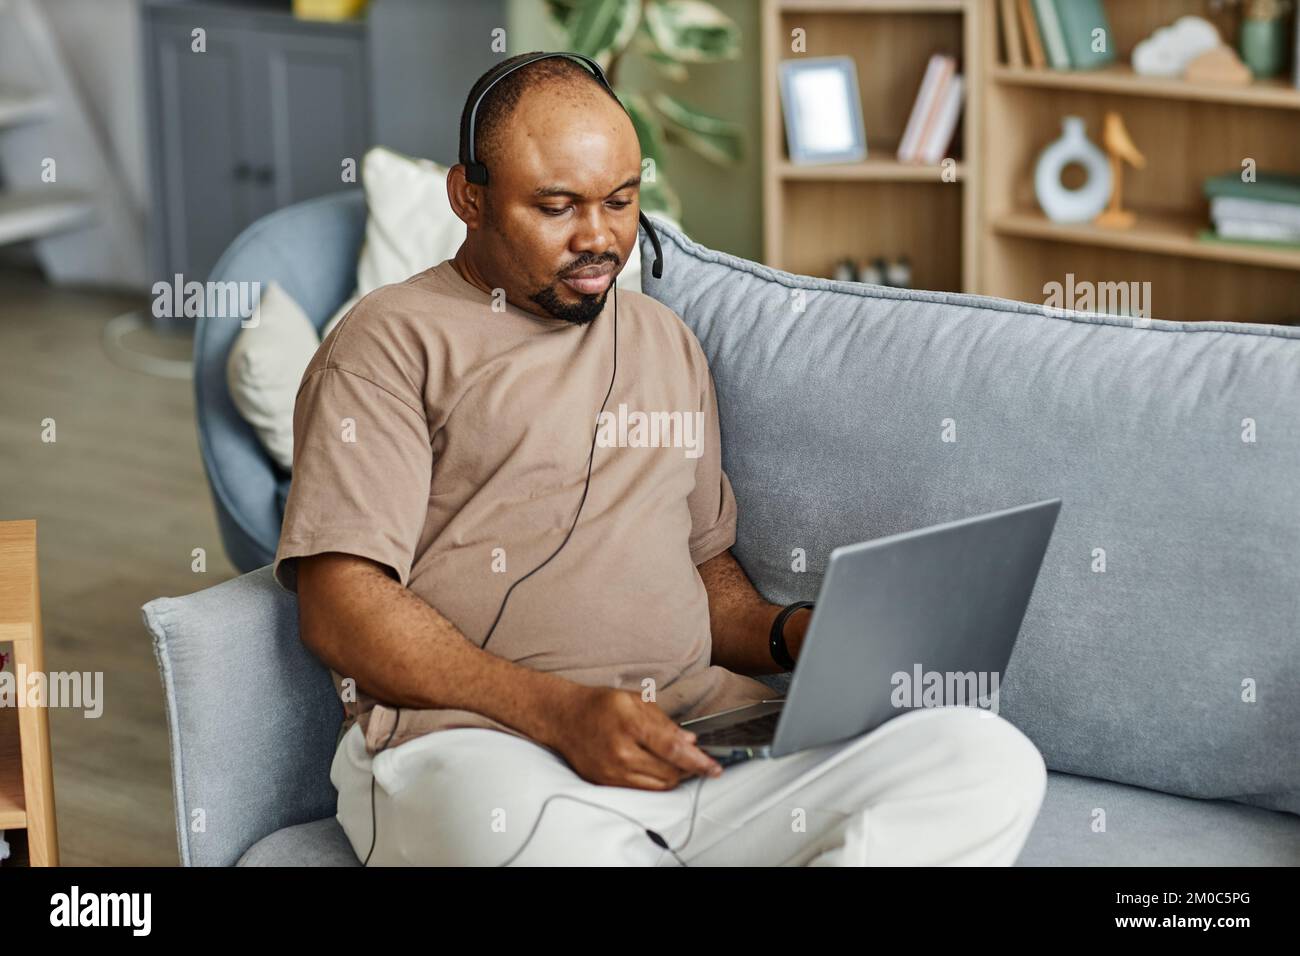 Portrait of black man using laptop with headset while working from home in online meeting, copy space Stock Photo